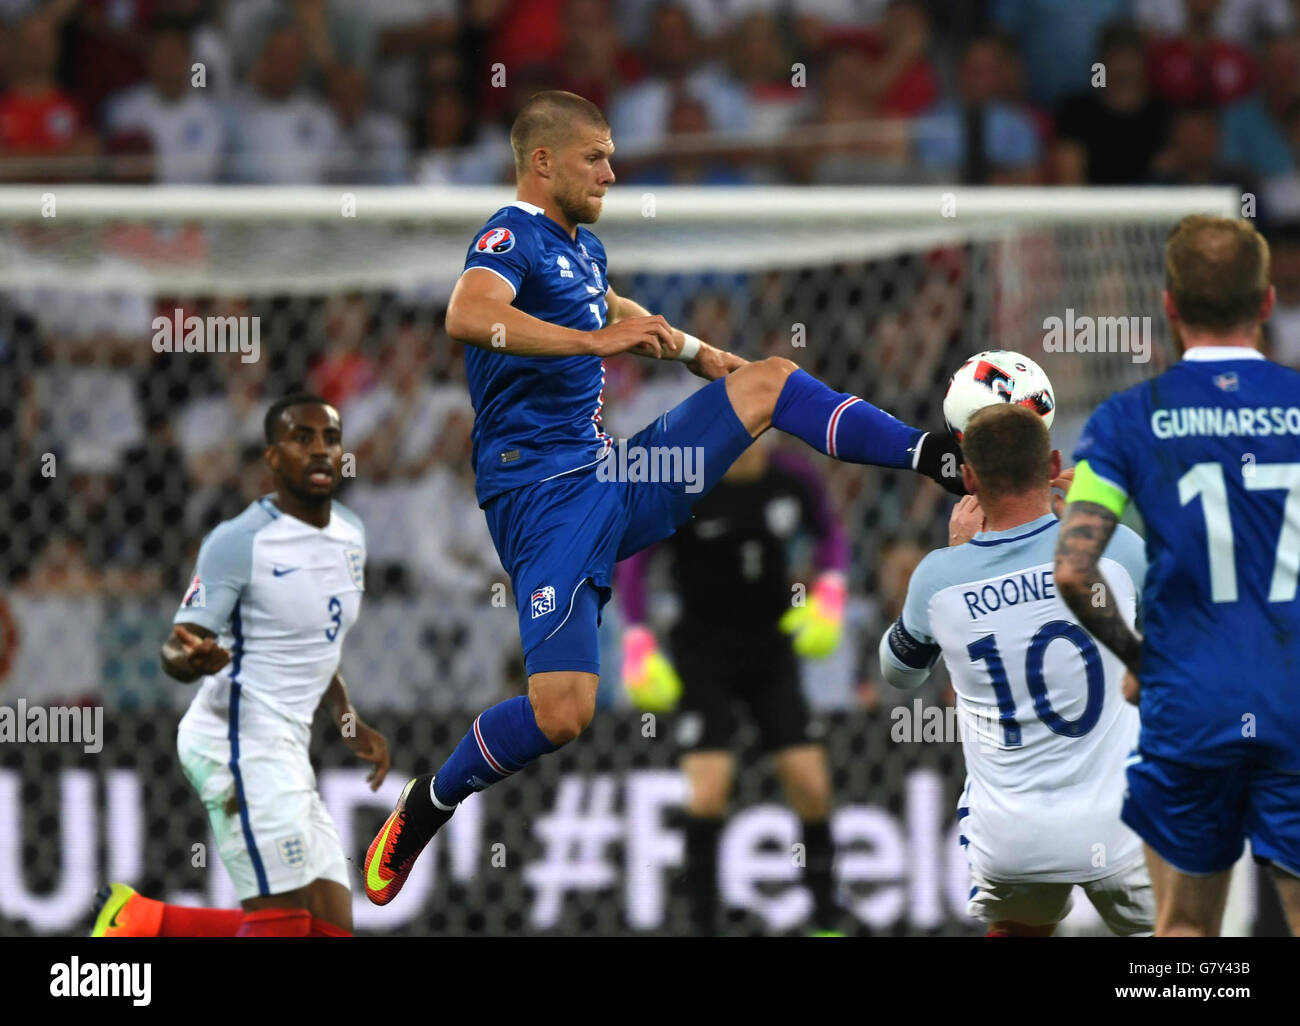 Nice, France. 27th June, 2016. Johann Gudmundsson(Top) of Iceland competes during the Euro 2016 round of 16 football match between England and Iceland in Nice, France, June 27, 2016. © Guo Yong/Xinhua/Alamy Live News Stock Photo